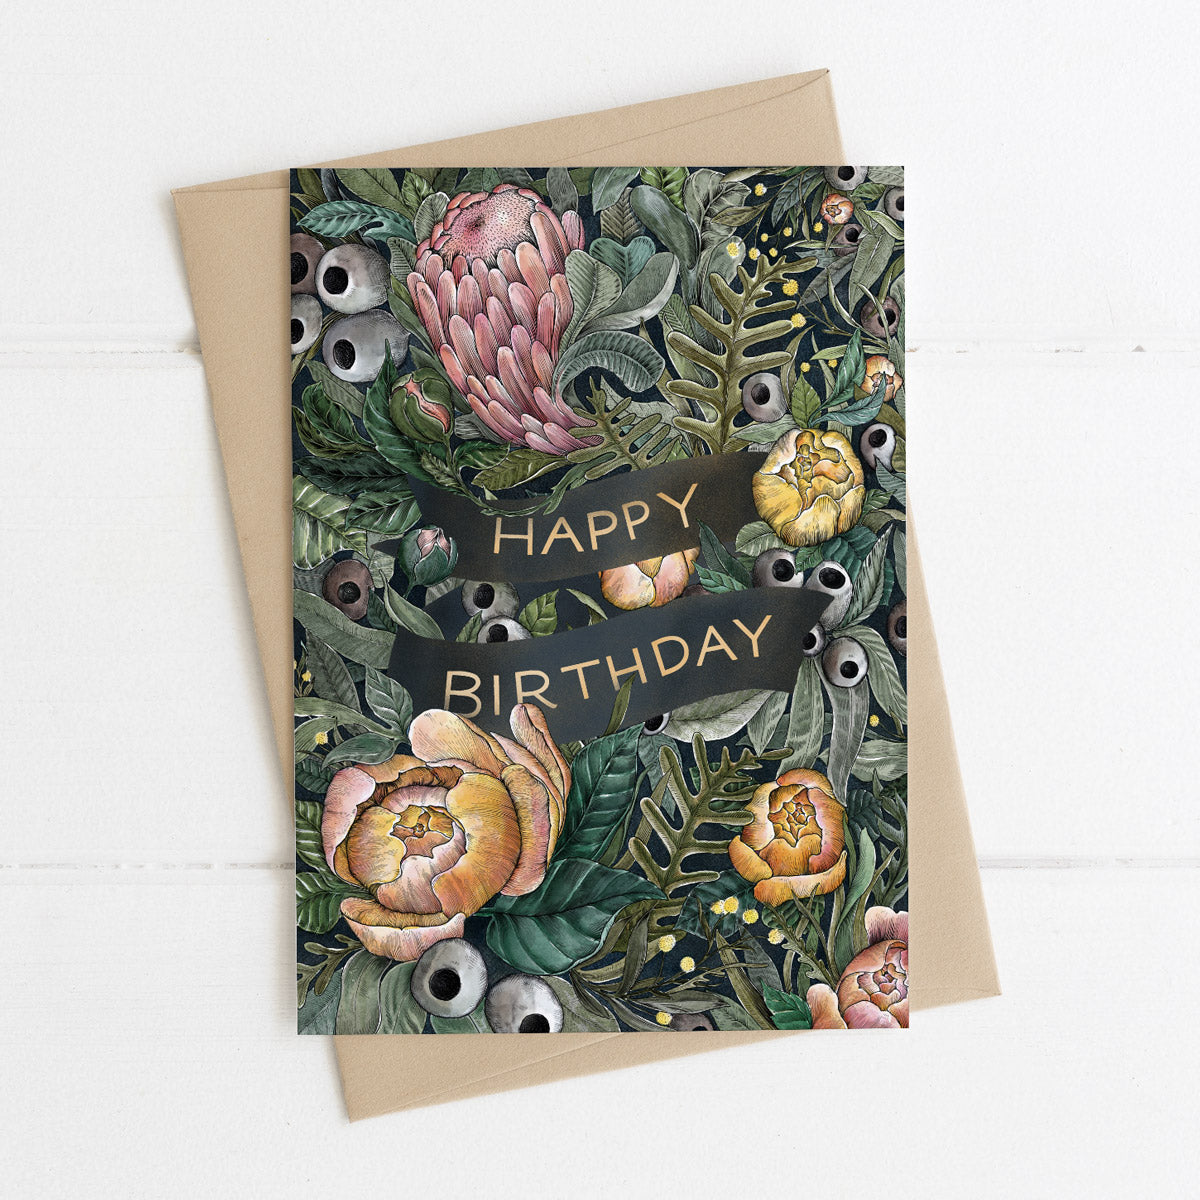 Happy Birthday Card - Protea & Roses Floral